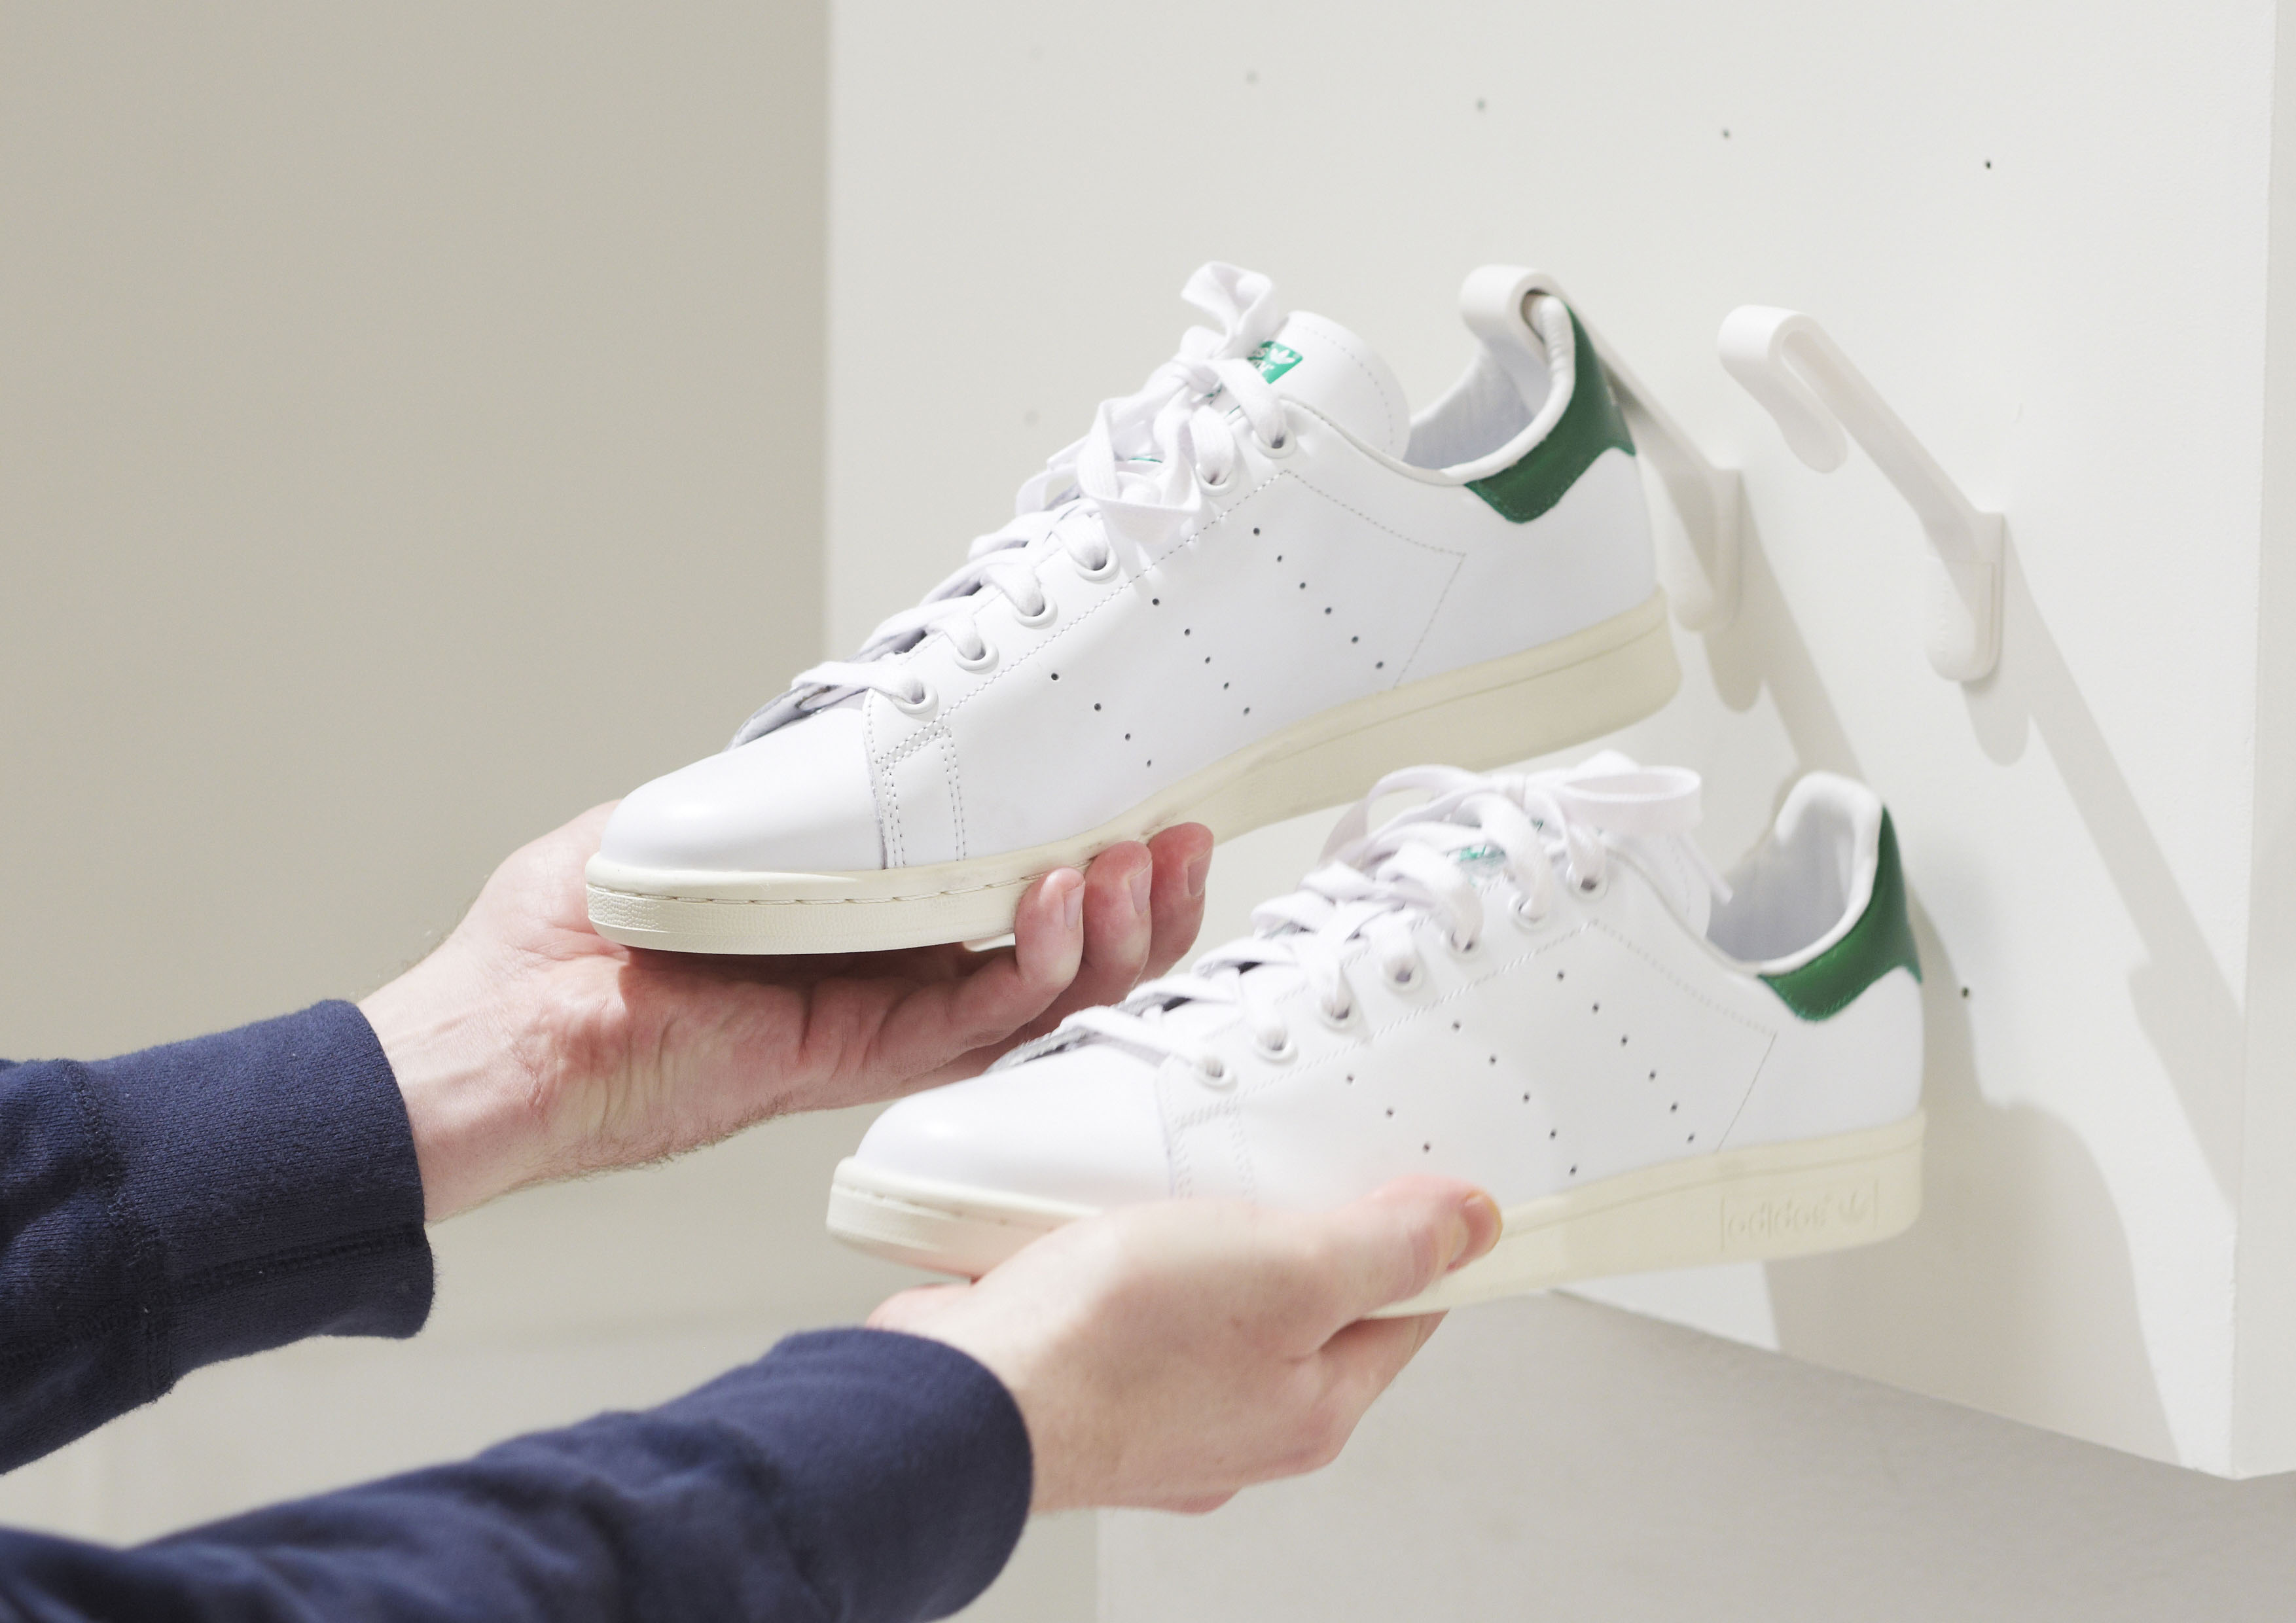 Two hands are taking a pair of white Adidas Stan Smith sneakers off of two white Staekler shoe storage hooks.